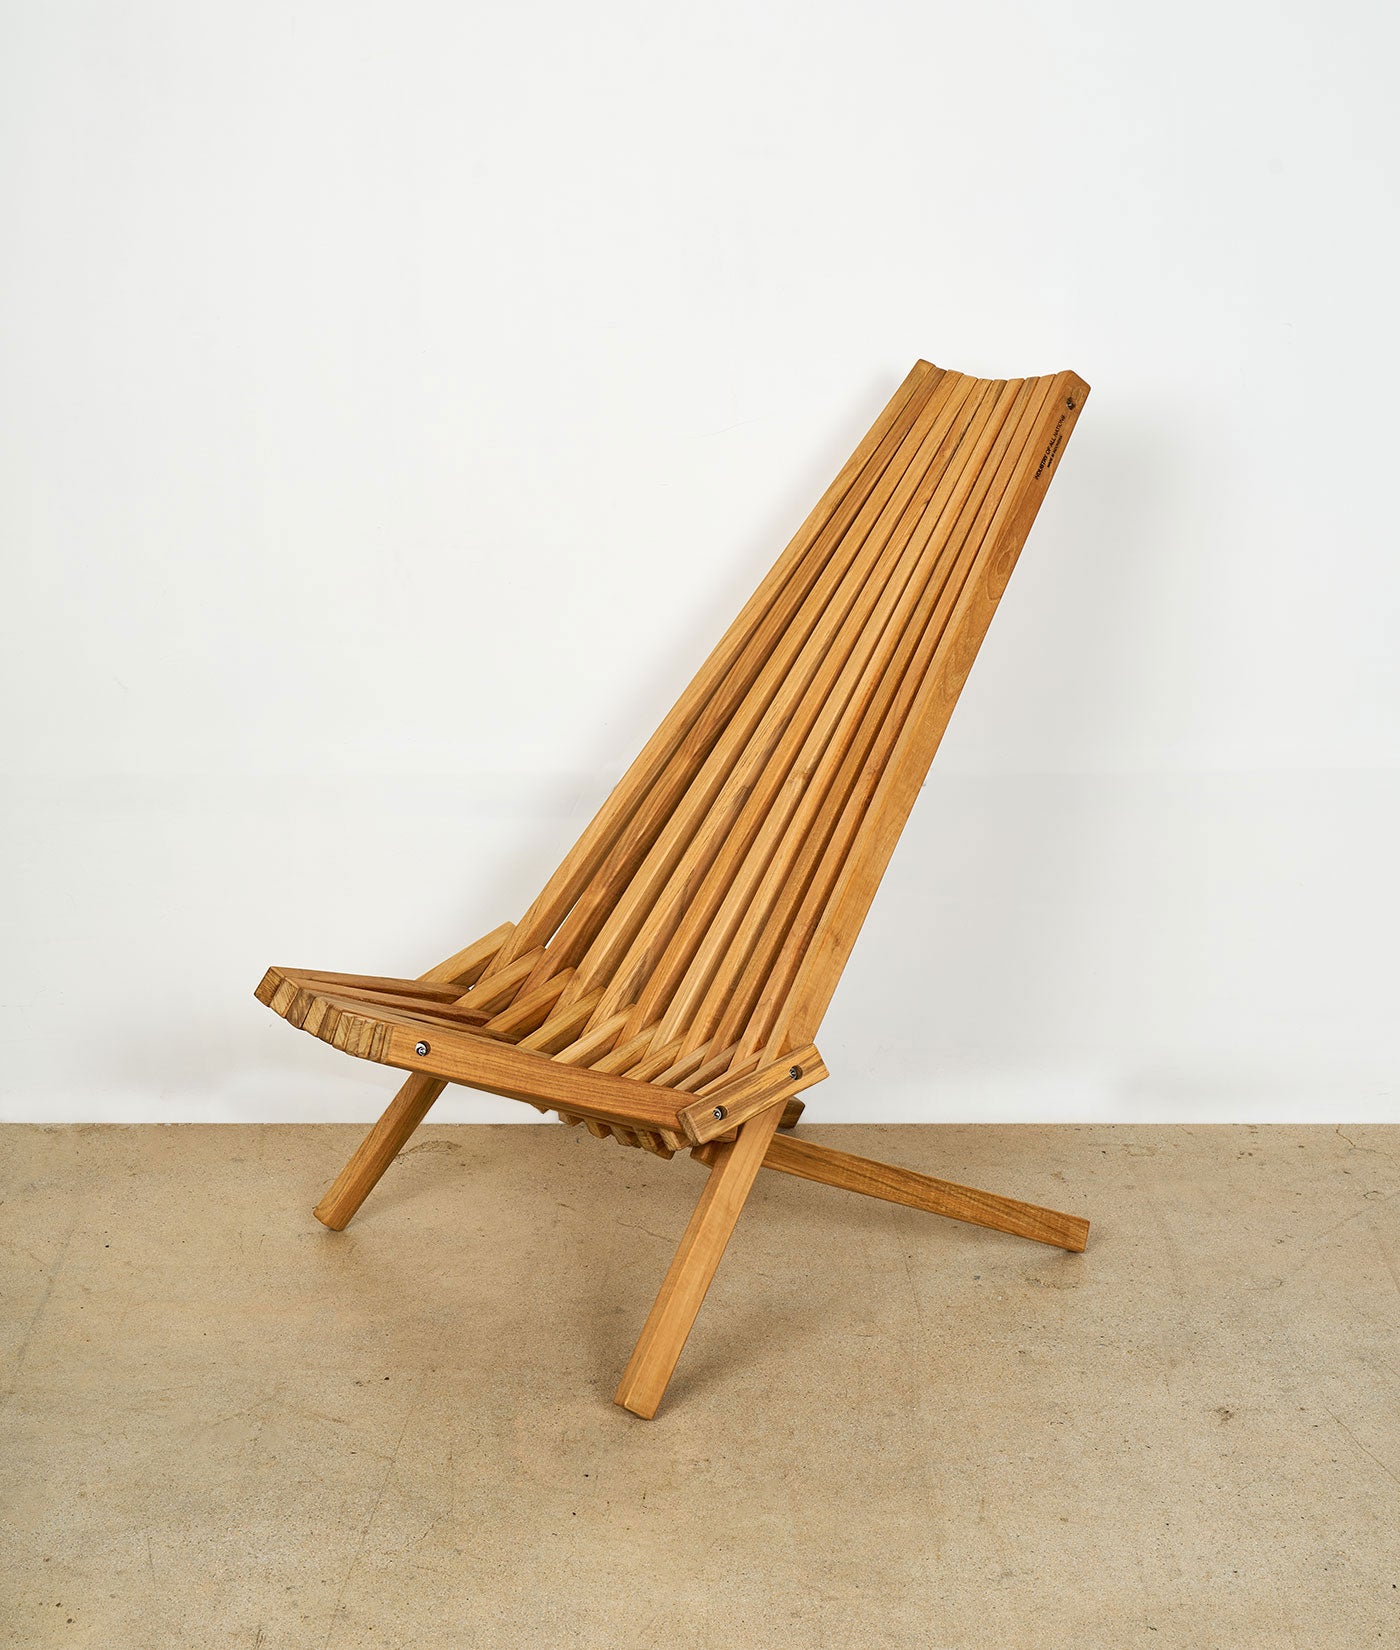 Industry of All Nations Panamericana Teak Wood Folding Chair 